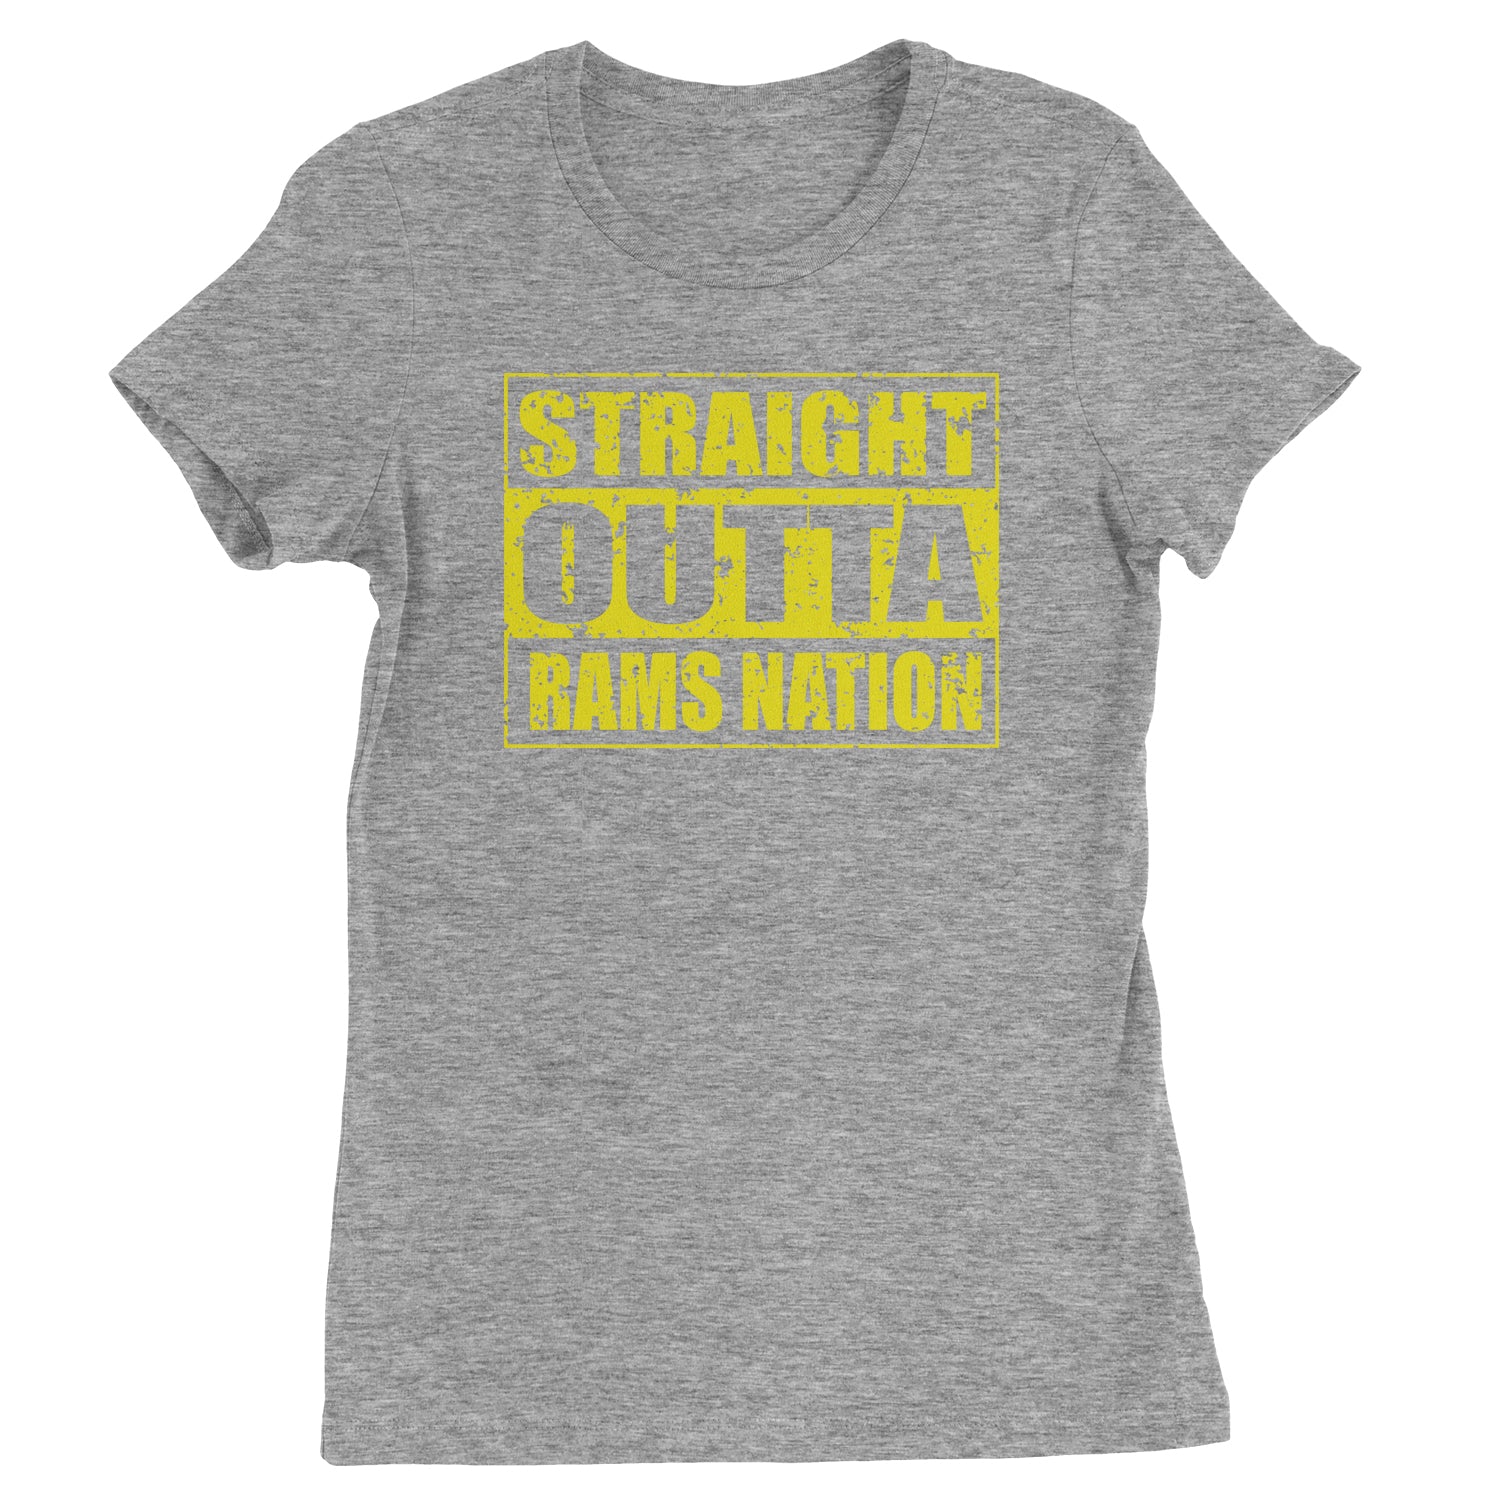 Straight Outta Rams Nation Womens T-shirt california, football, jersey by Expression Tees